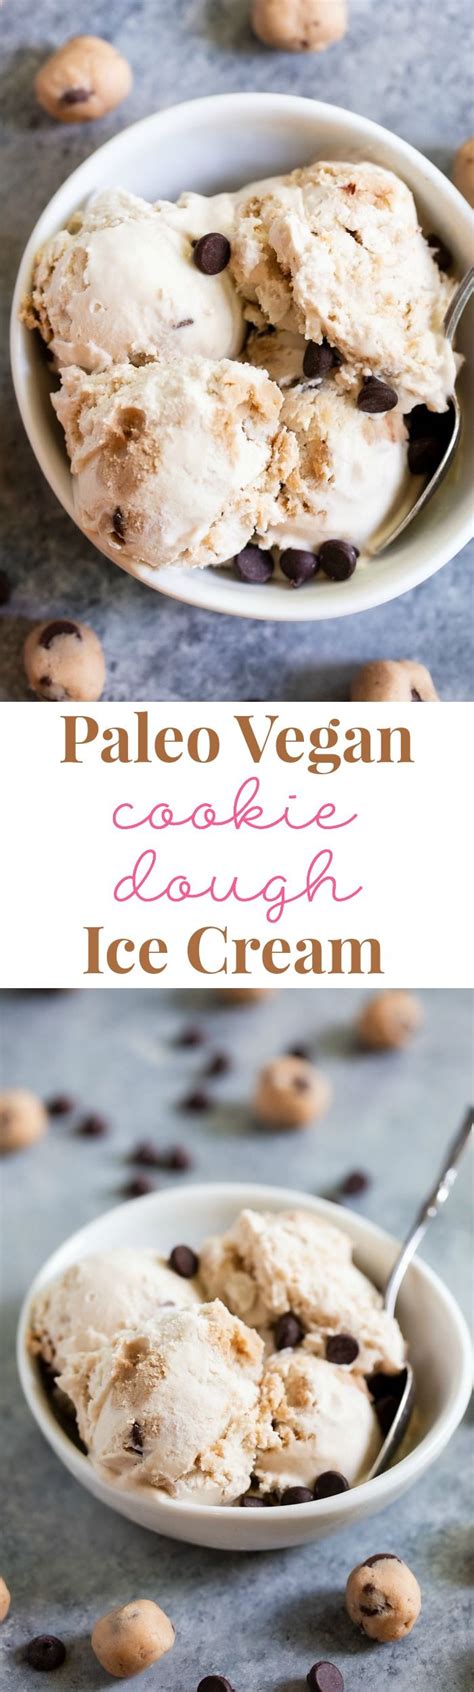 We may earn money from the links on this page. Chocolate Chip Cookie Dough Ice Cream (Paleo, Vegan, Nut ...